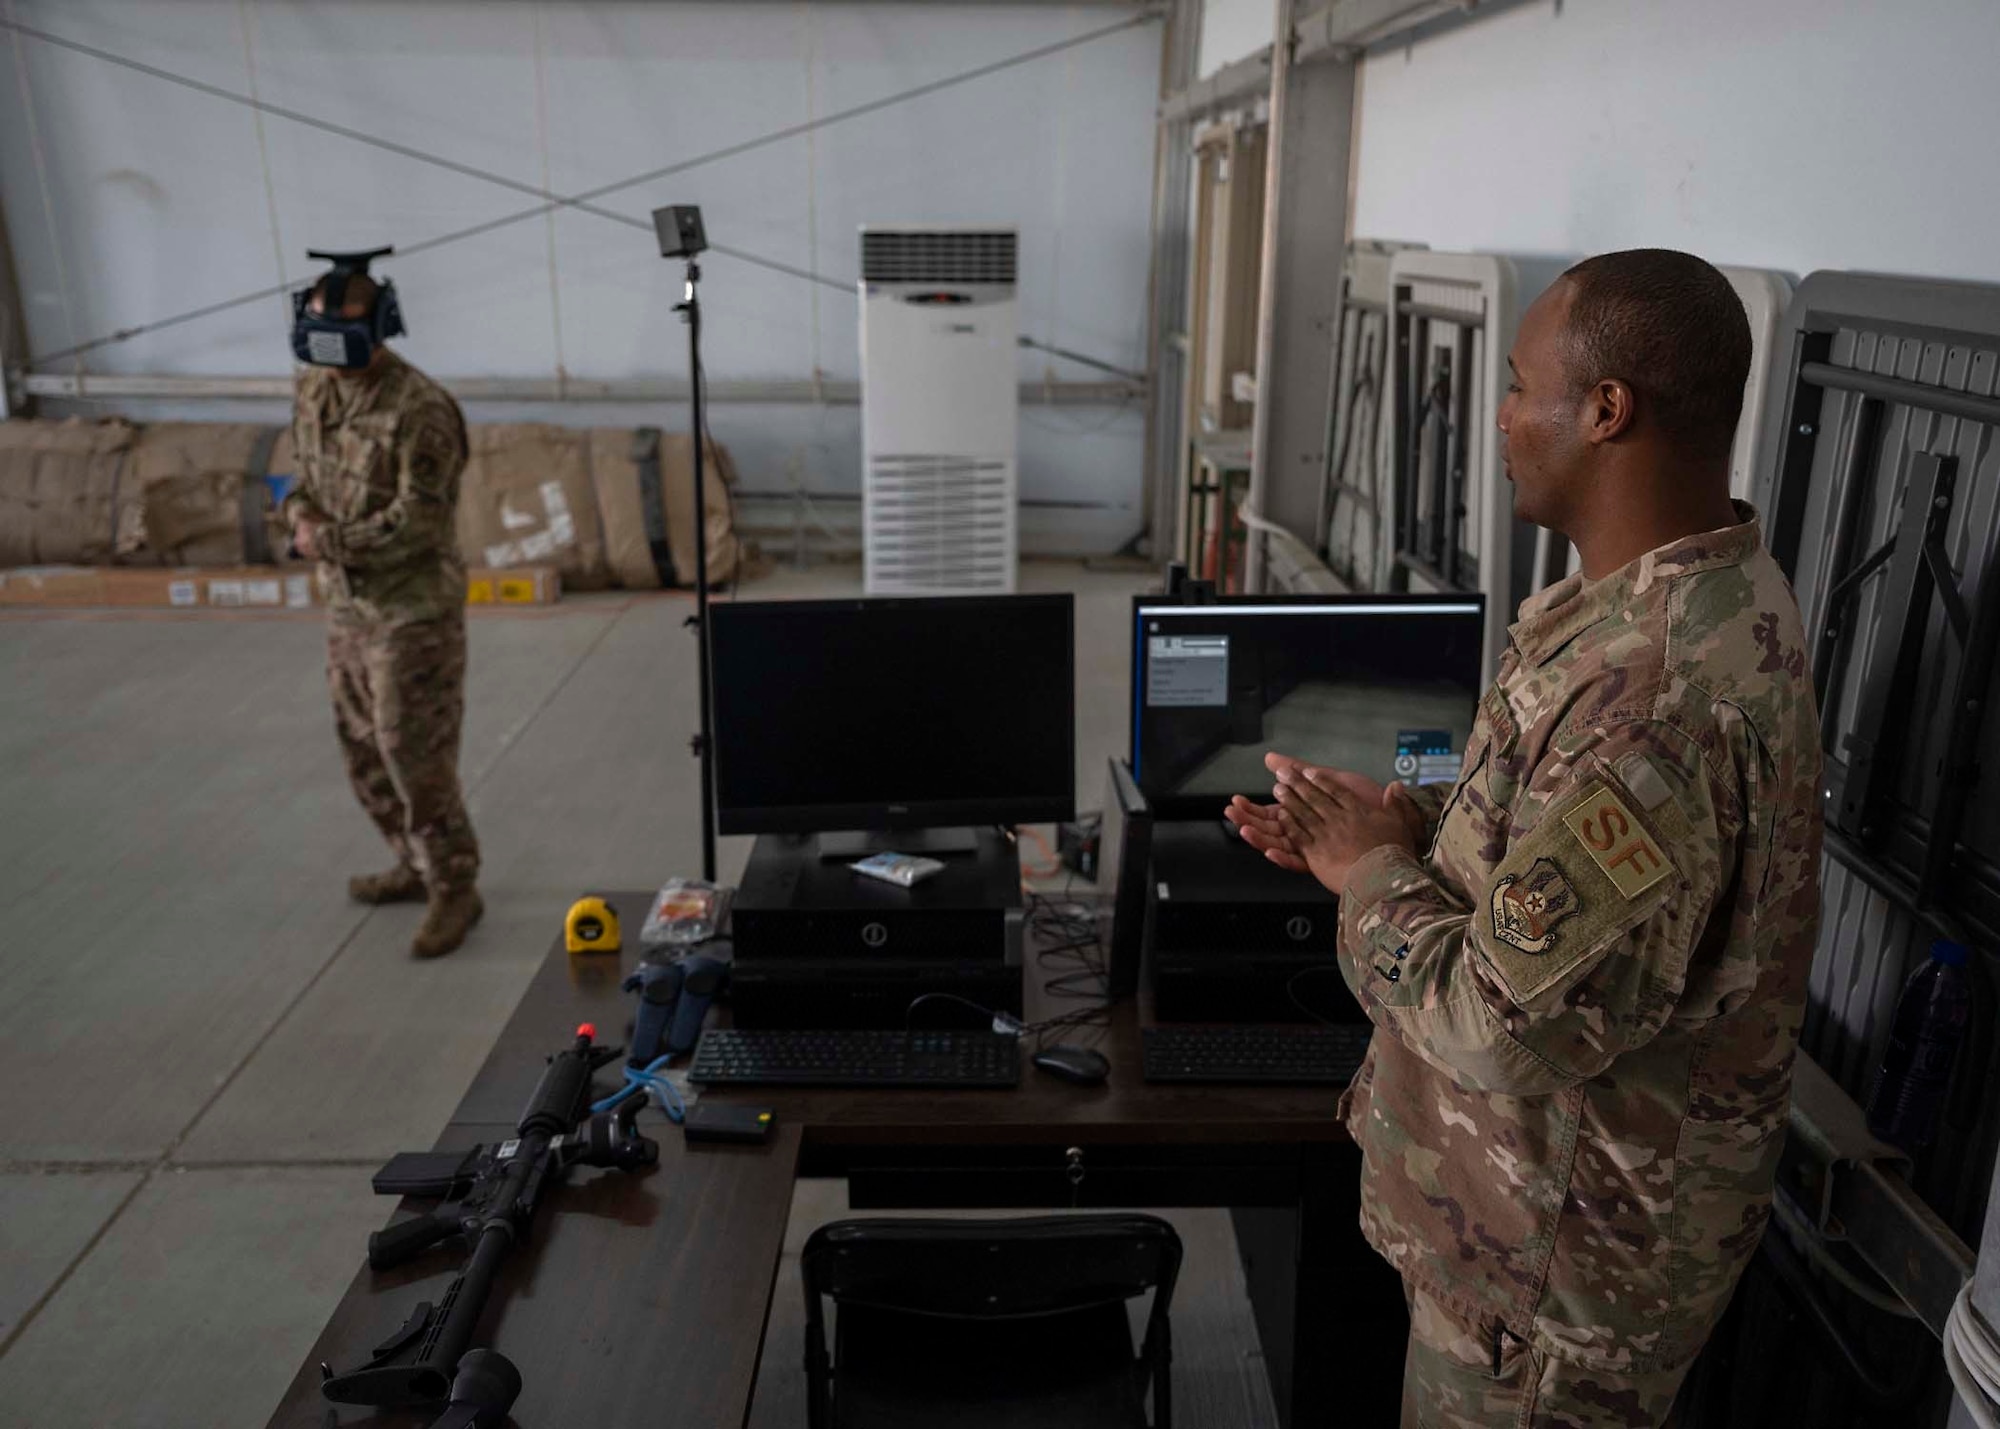 U.S. Air Force Tech. Sgt. Frank Unsioug (left), 380th Expeditionary Security Forces Squadron (ESFS) combat arms instructor, uses a virtual reality (VR) system in a virtual response as Master Sgt. Kenneth Greene (right), 380th ESFS training NCO in charge, analyzes his performance at Al Dhafra Air Base, United Arab Emirates, Jan. 20, 2020.